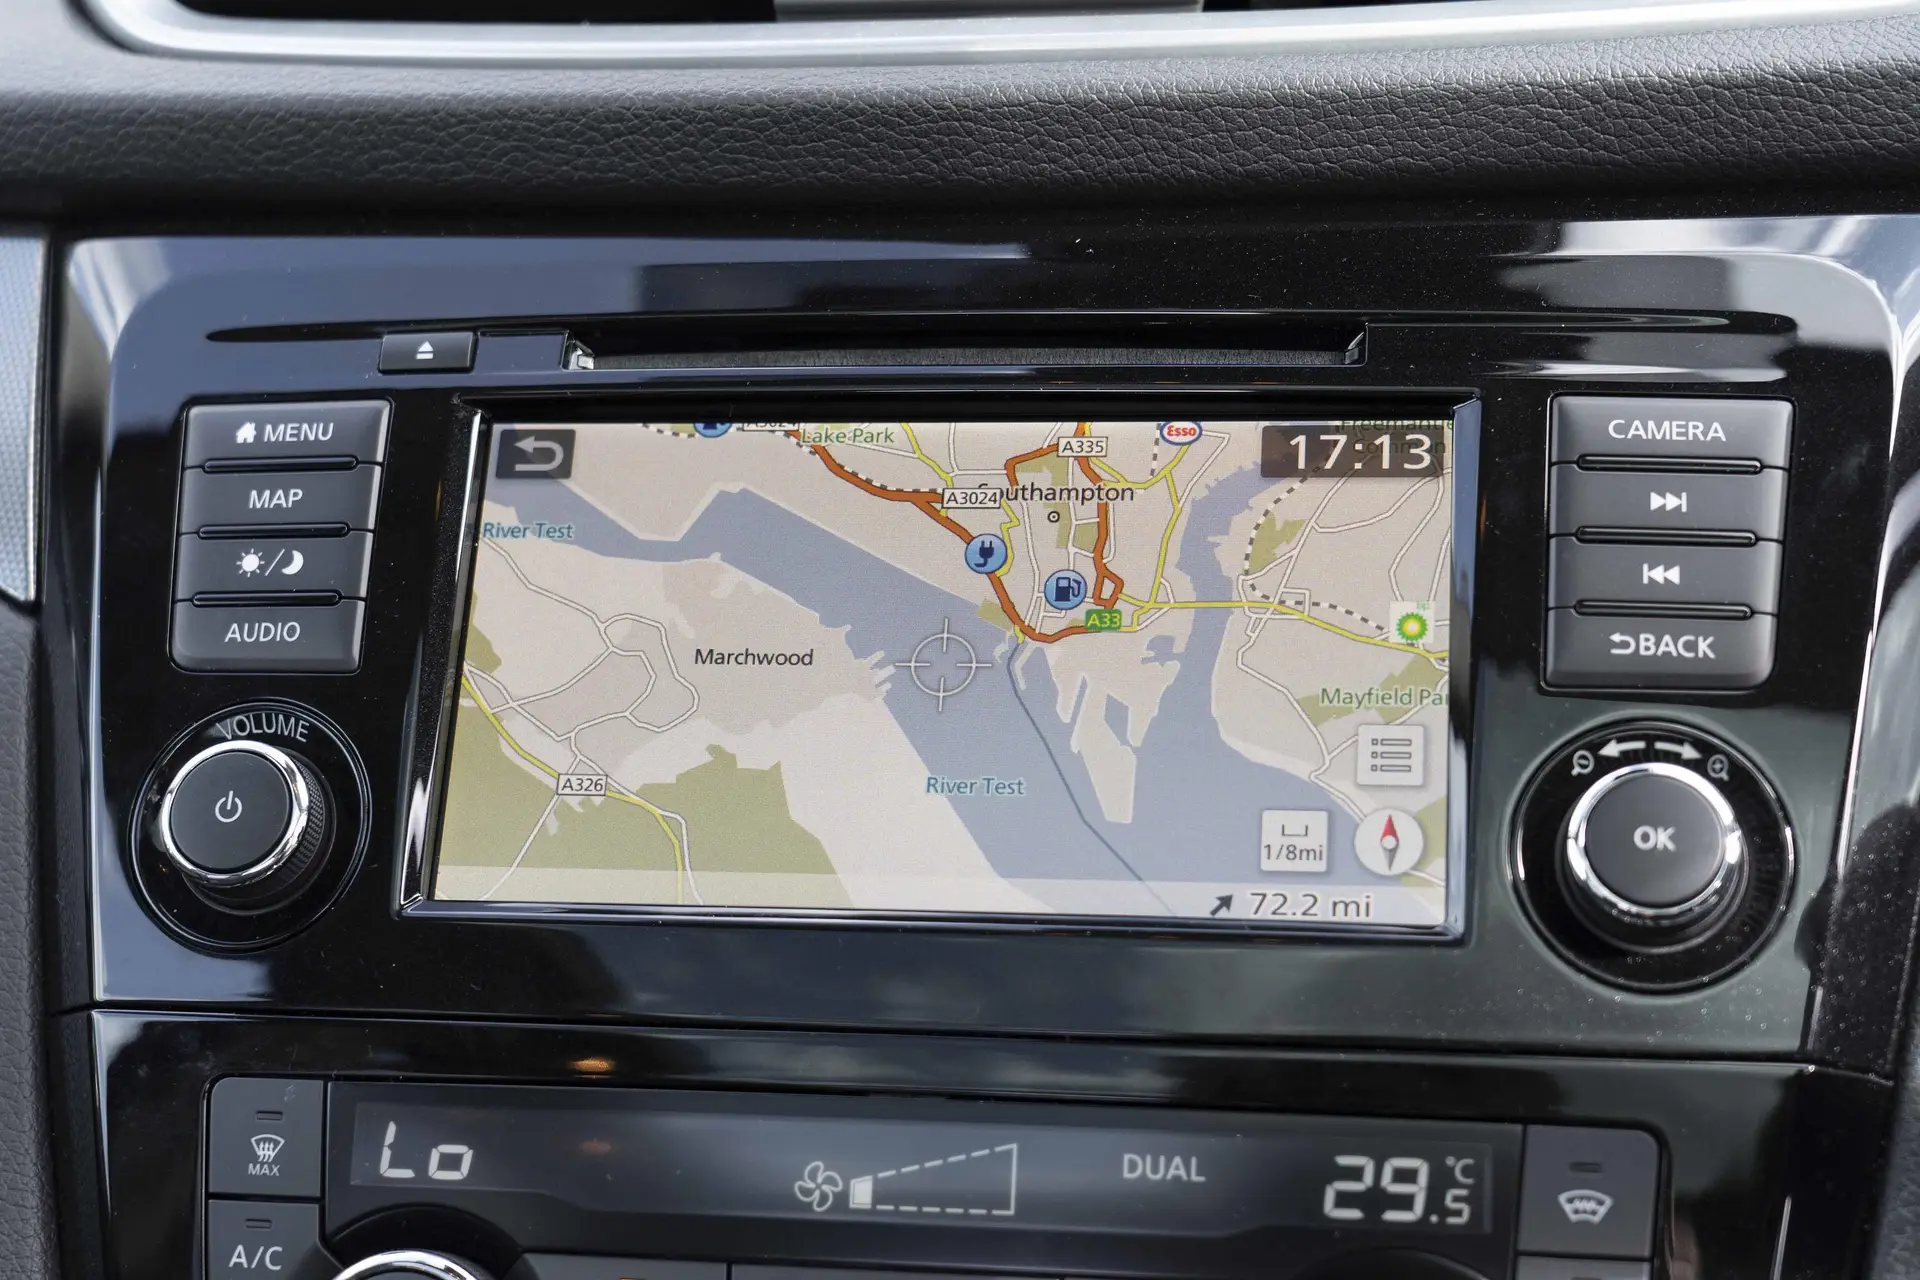 Used Nissan Qashqai (2013-2021) Review: interior close up photo of the Nissan Qashqai infotainment